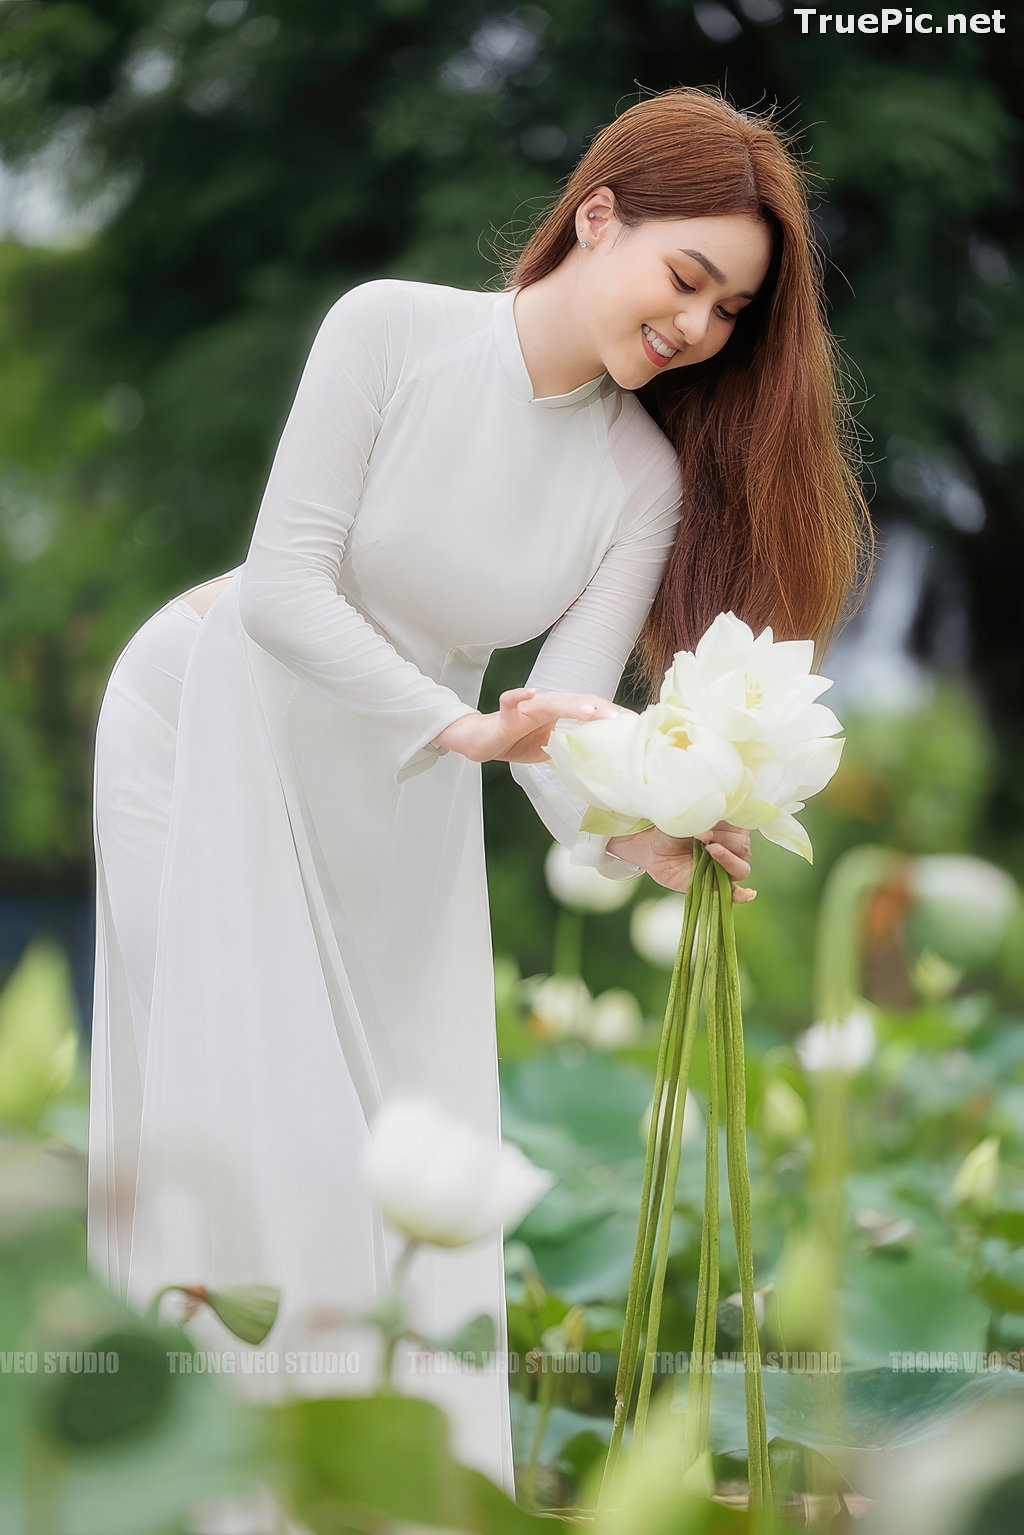 Image Vietnamese Model - Beautiful Girl and Lotus Flower - TruePic.net (56 pictures) - Picture-55